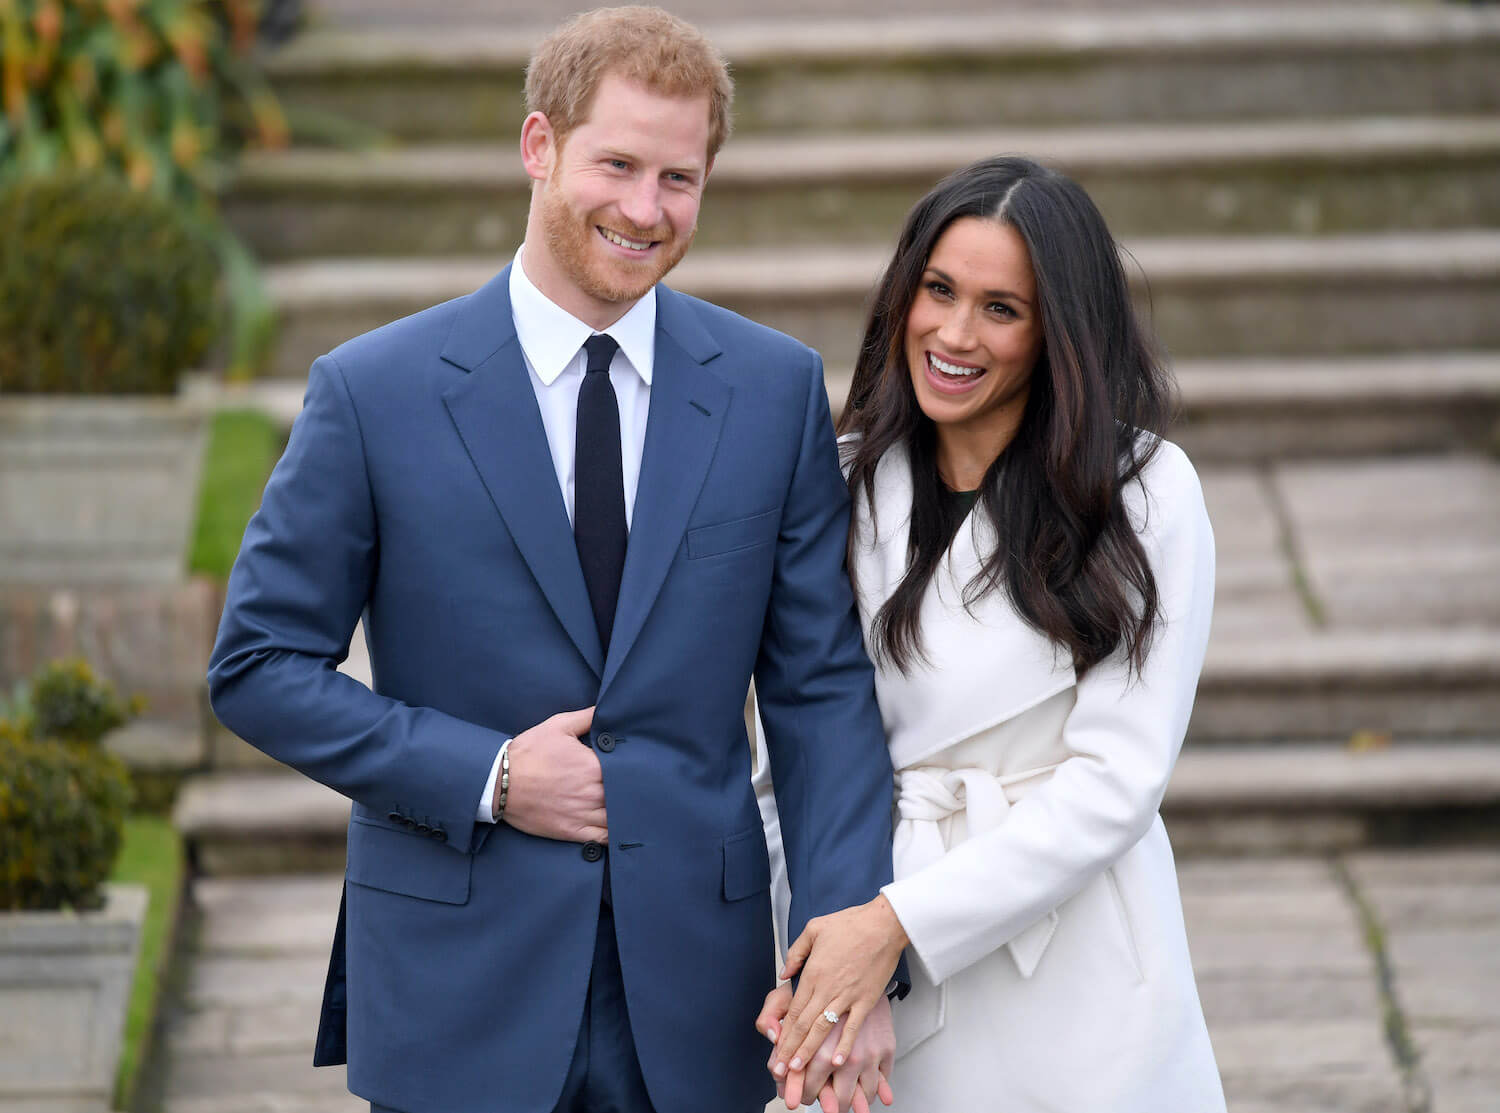 Prince Harry wears a suit, smiles, and holds hands with Meghan Markle who smiles while wearing white and showing off her engagement rings